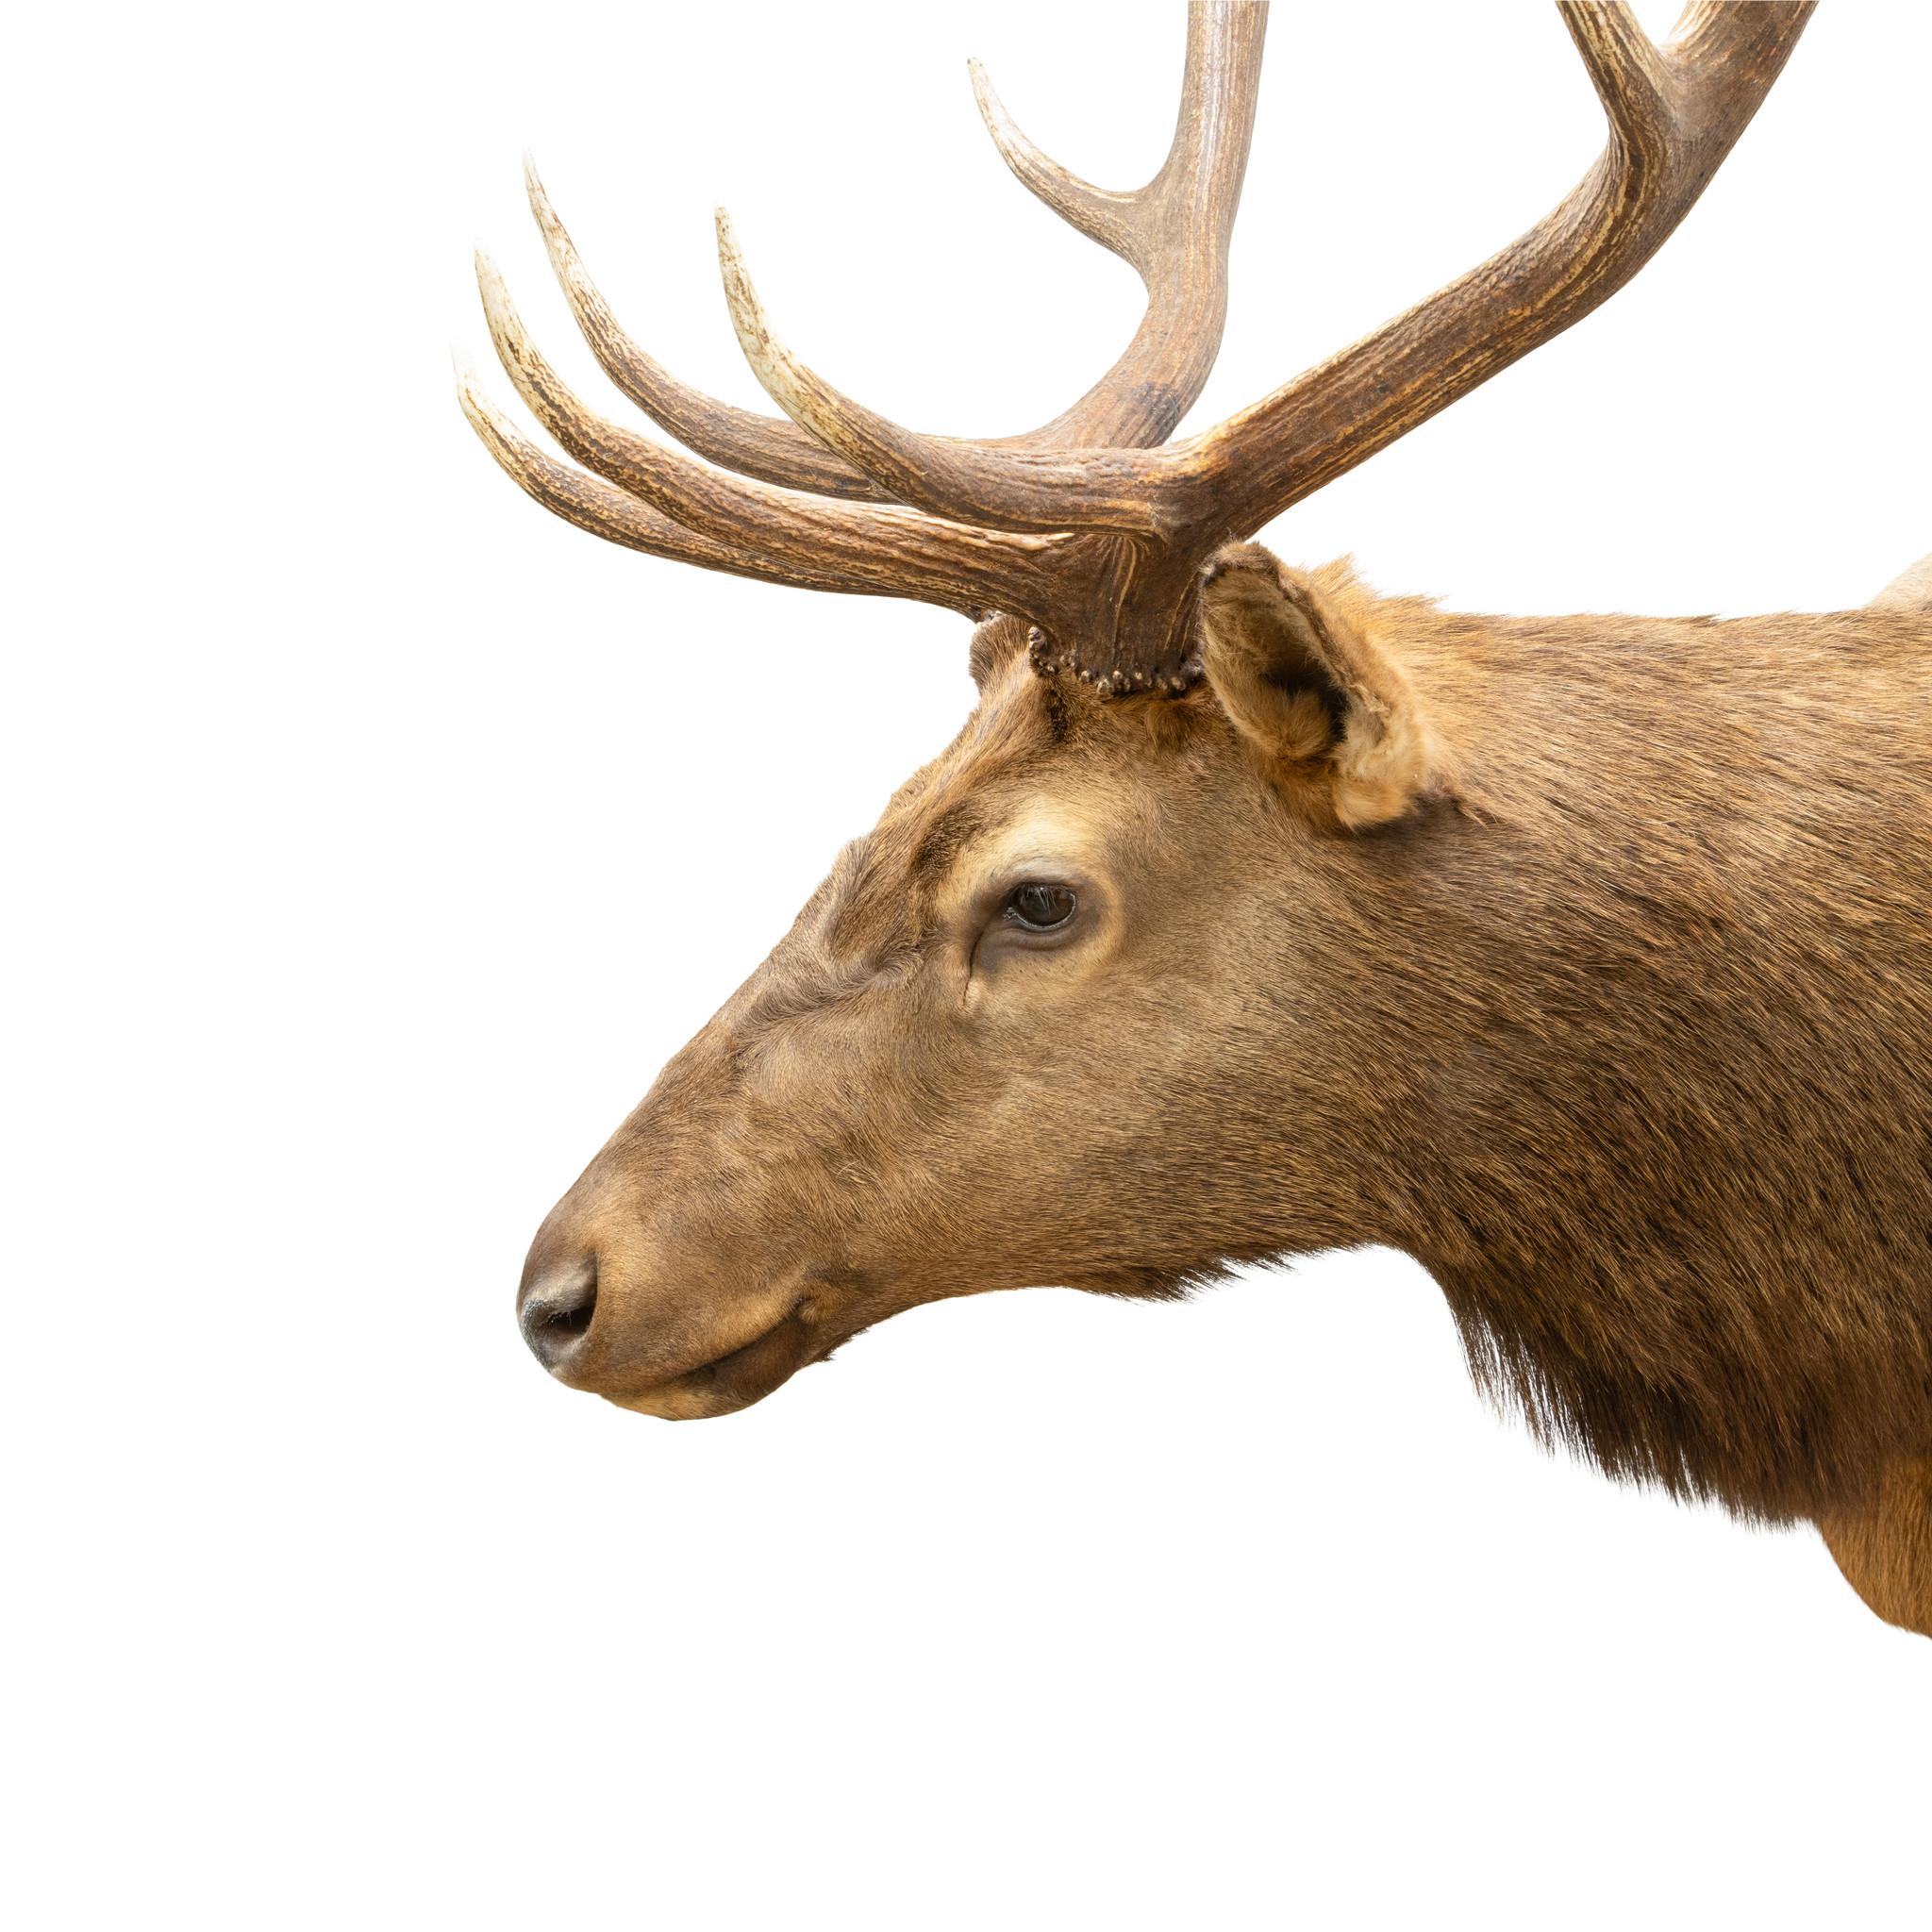 Idaho 6 x 6 elk taxidermy mount. With slight right turn to head and nice fur. Lage set of antlers. 50”H x 48”W protrudes 48”. Would make a great statement piece in a rustic lodge or cabin. 

Family Owned & Operated
Cisco’s Gallery deals in the rare,